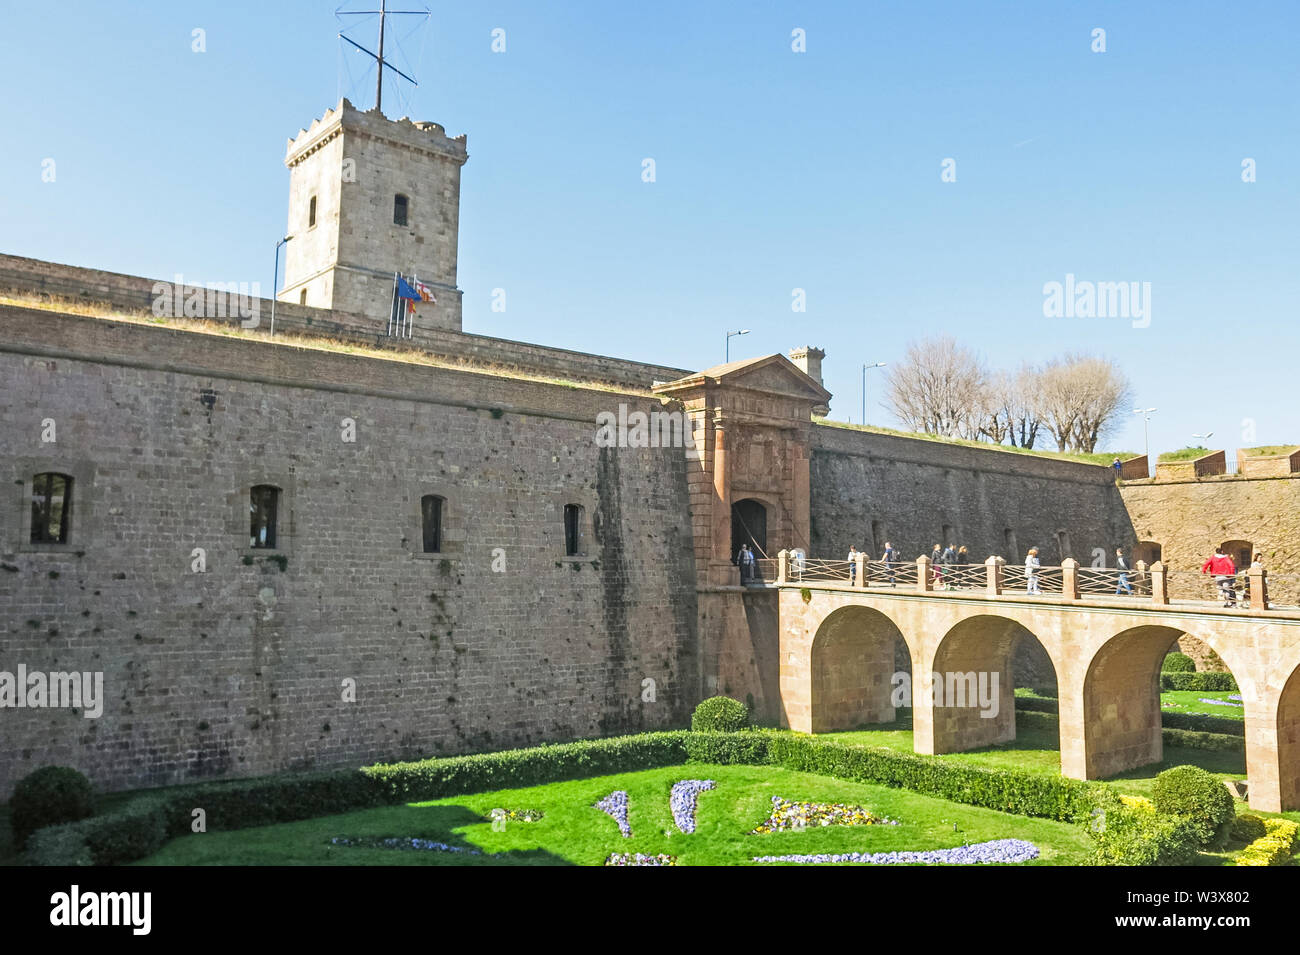 Barcelona, Spain - February 24, 2019: Tourists at the main entrance of the Montjuic Castle on the mountain of Montjuic, in the city of Barcelona. Spai Stock Photo